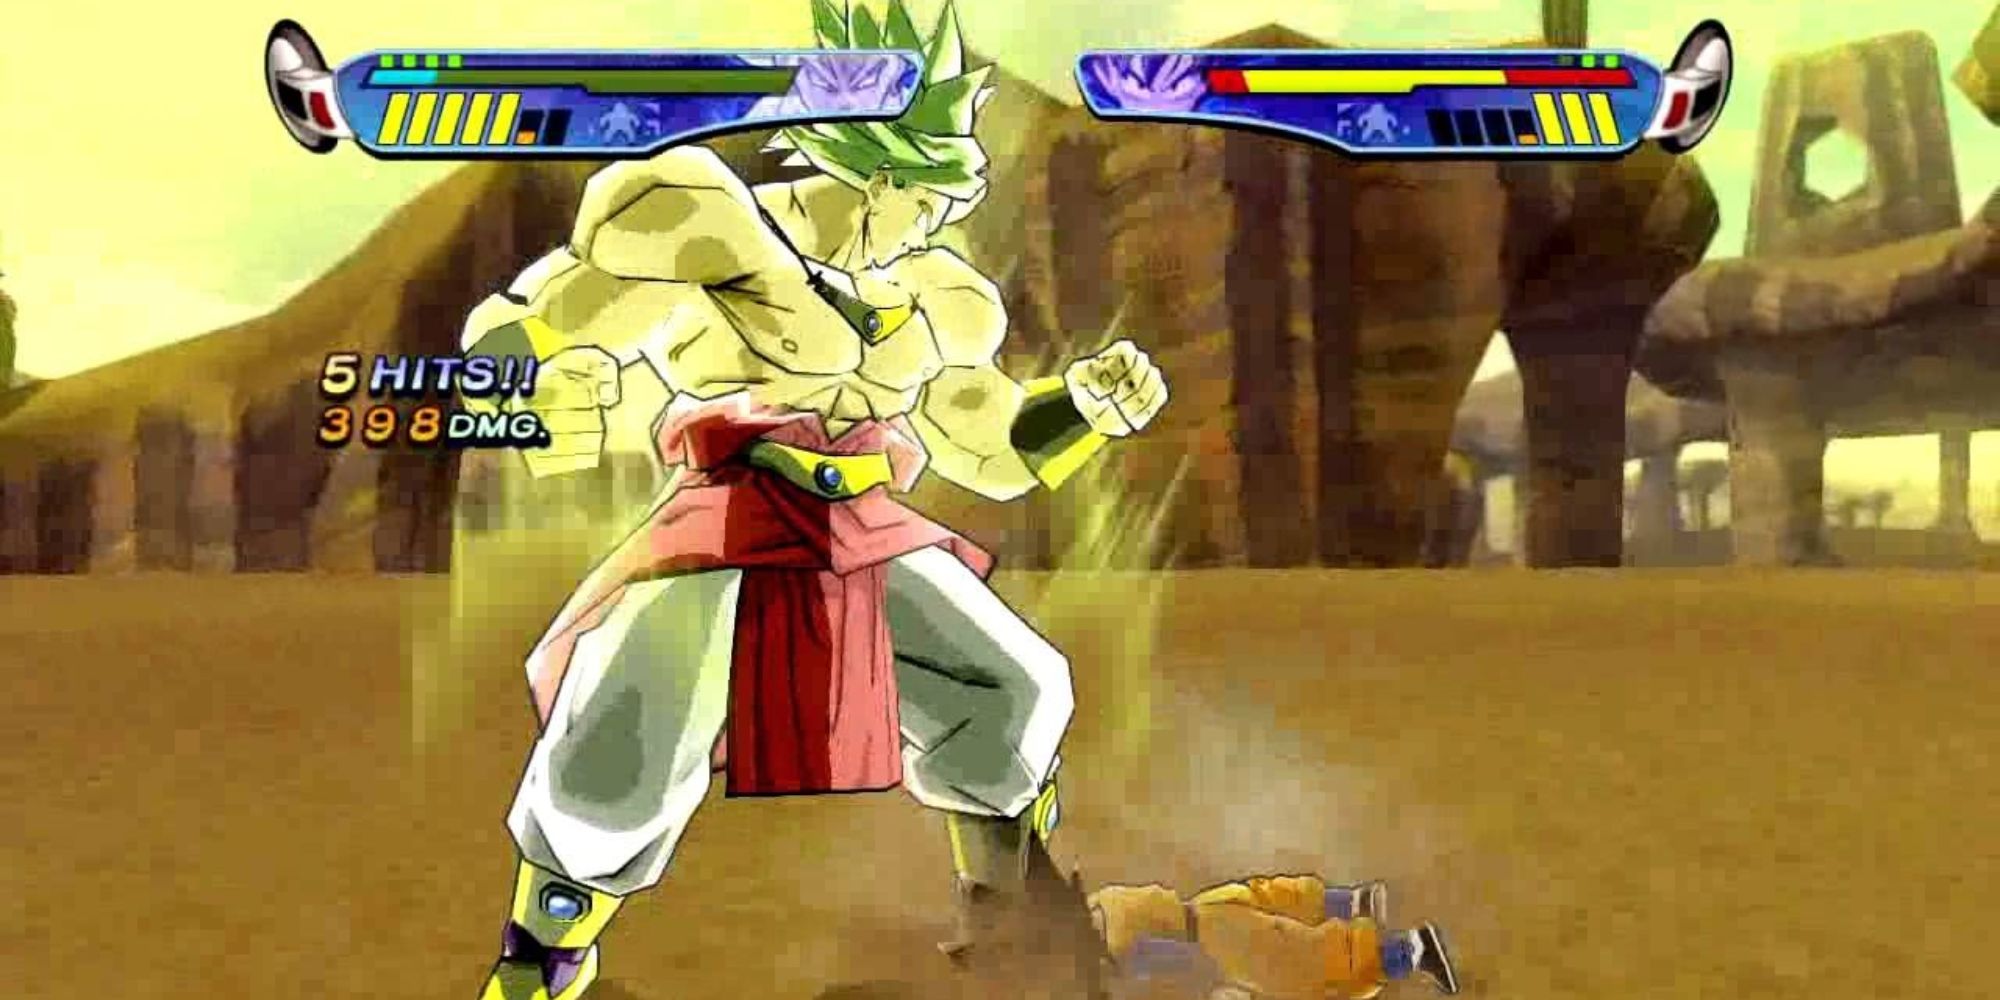 Broly stands over Goten who has been knocked to the ground.